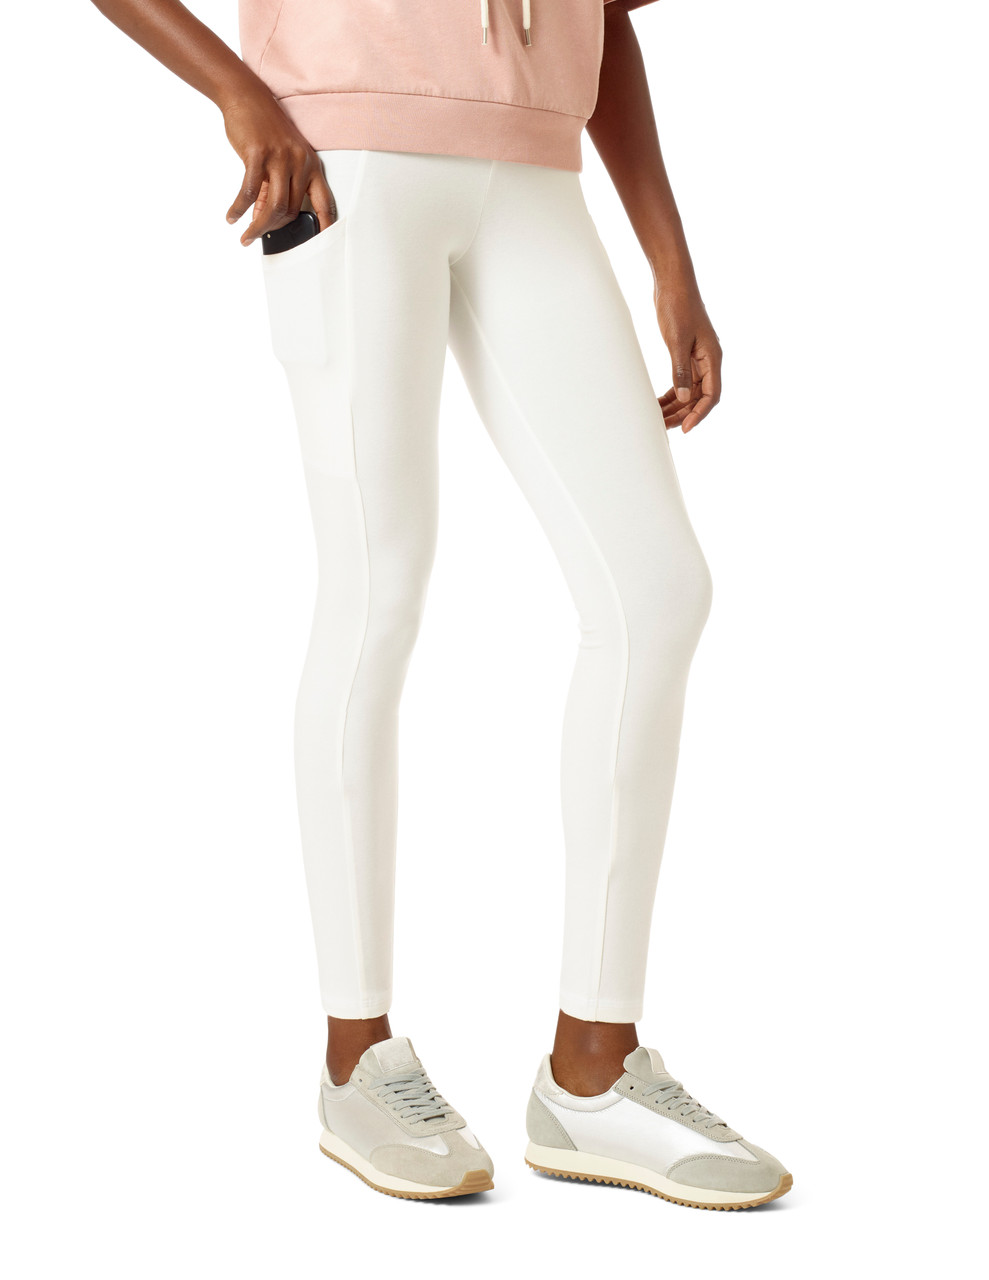 High Waist Elastic Yoga Leggings With Pockets With Pocket 2021 New Arrival  For Women Tight, Breathable, And Naked Like Perfect For Gym And Workouts  H1221 From Mengyang10, $16.18 | DHgate.Com